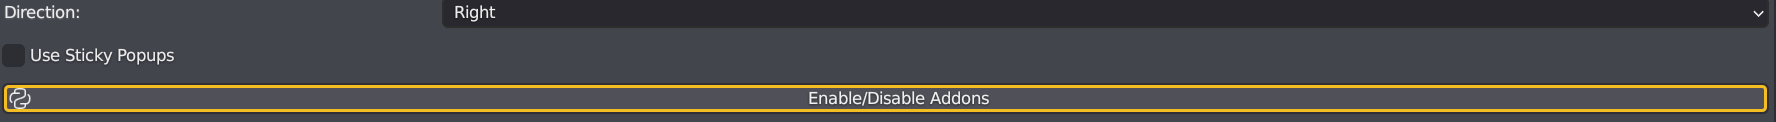 Enable-Disable